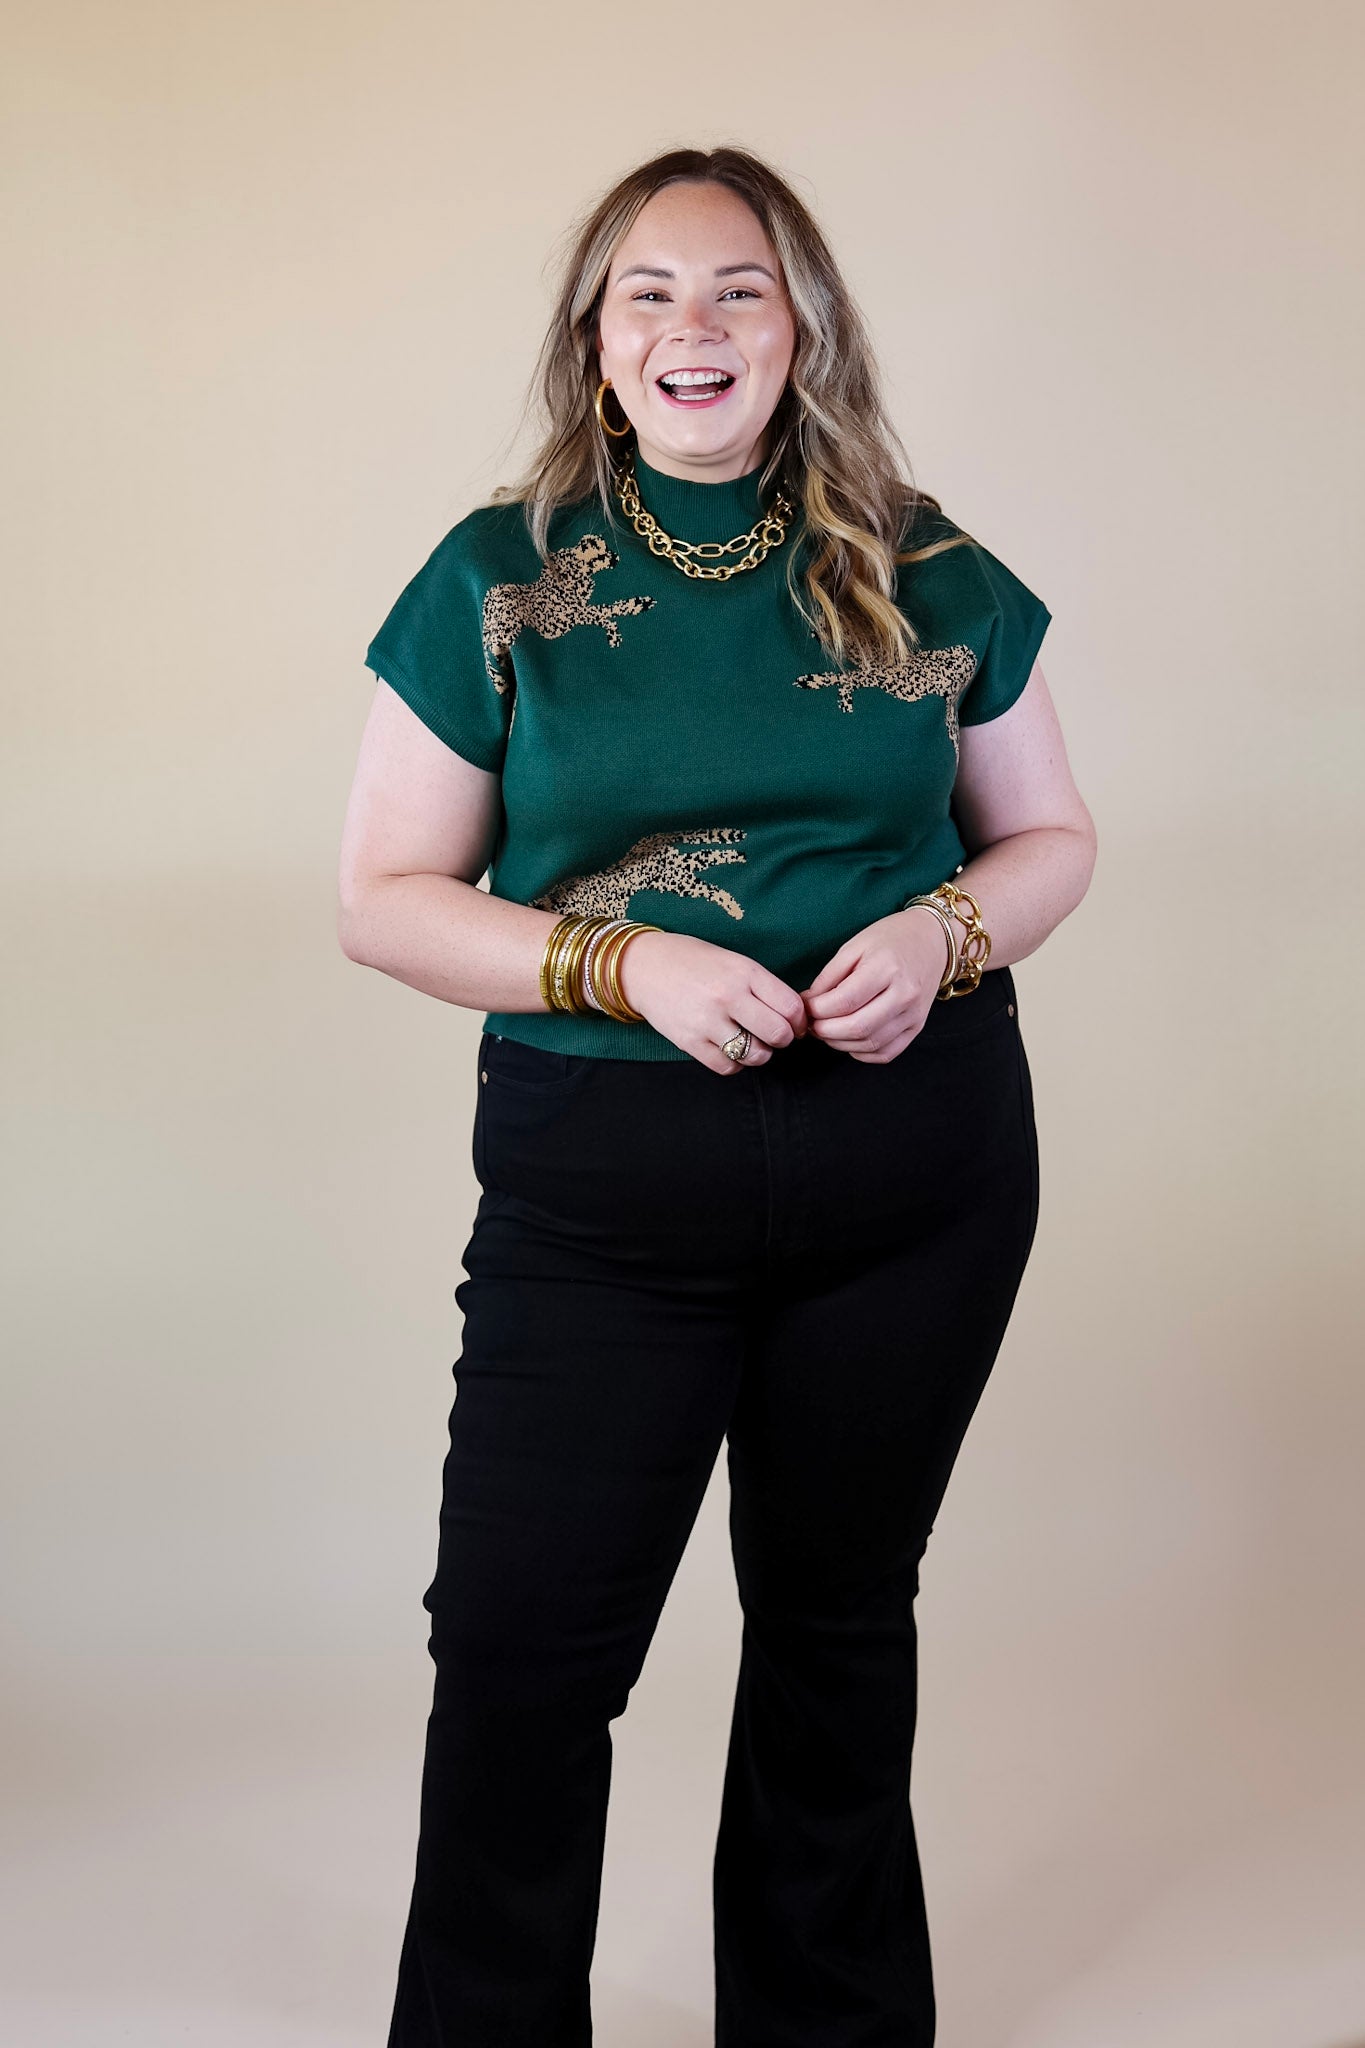 Upscale Charm Cheetah Print Sweater Top in Hunter Green - Giddy Up Glamour Boutique